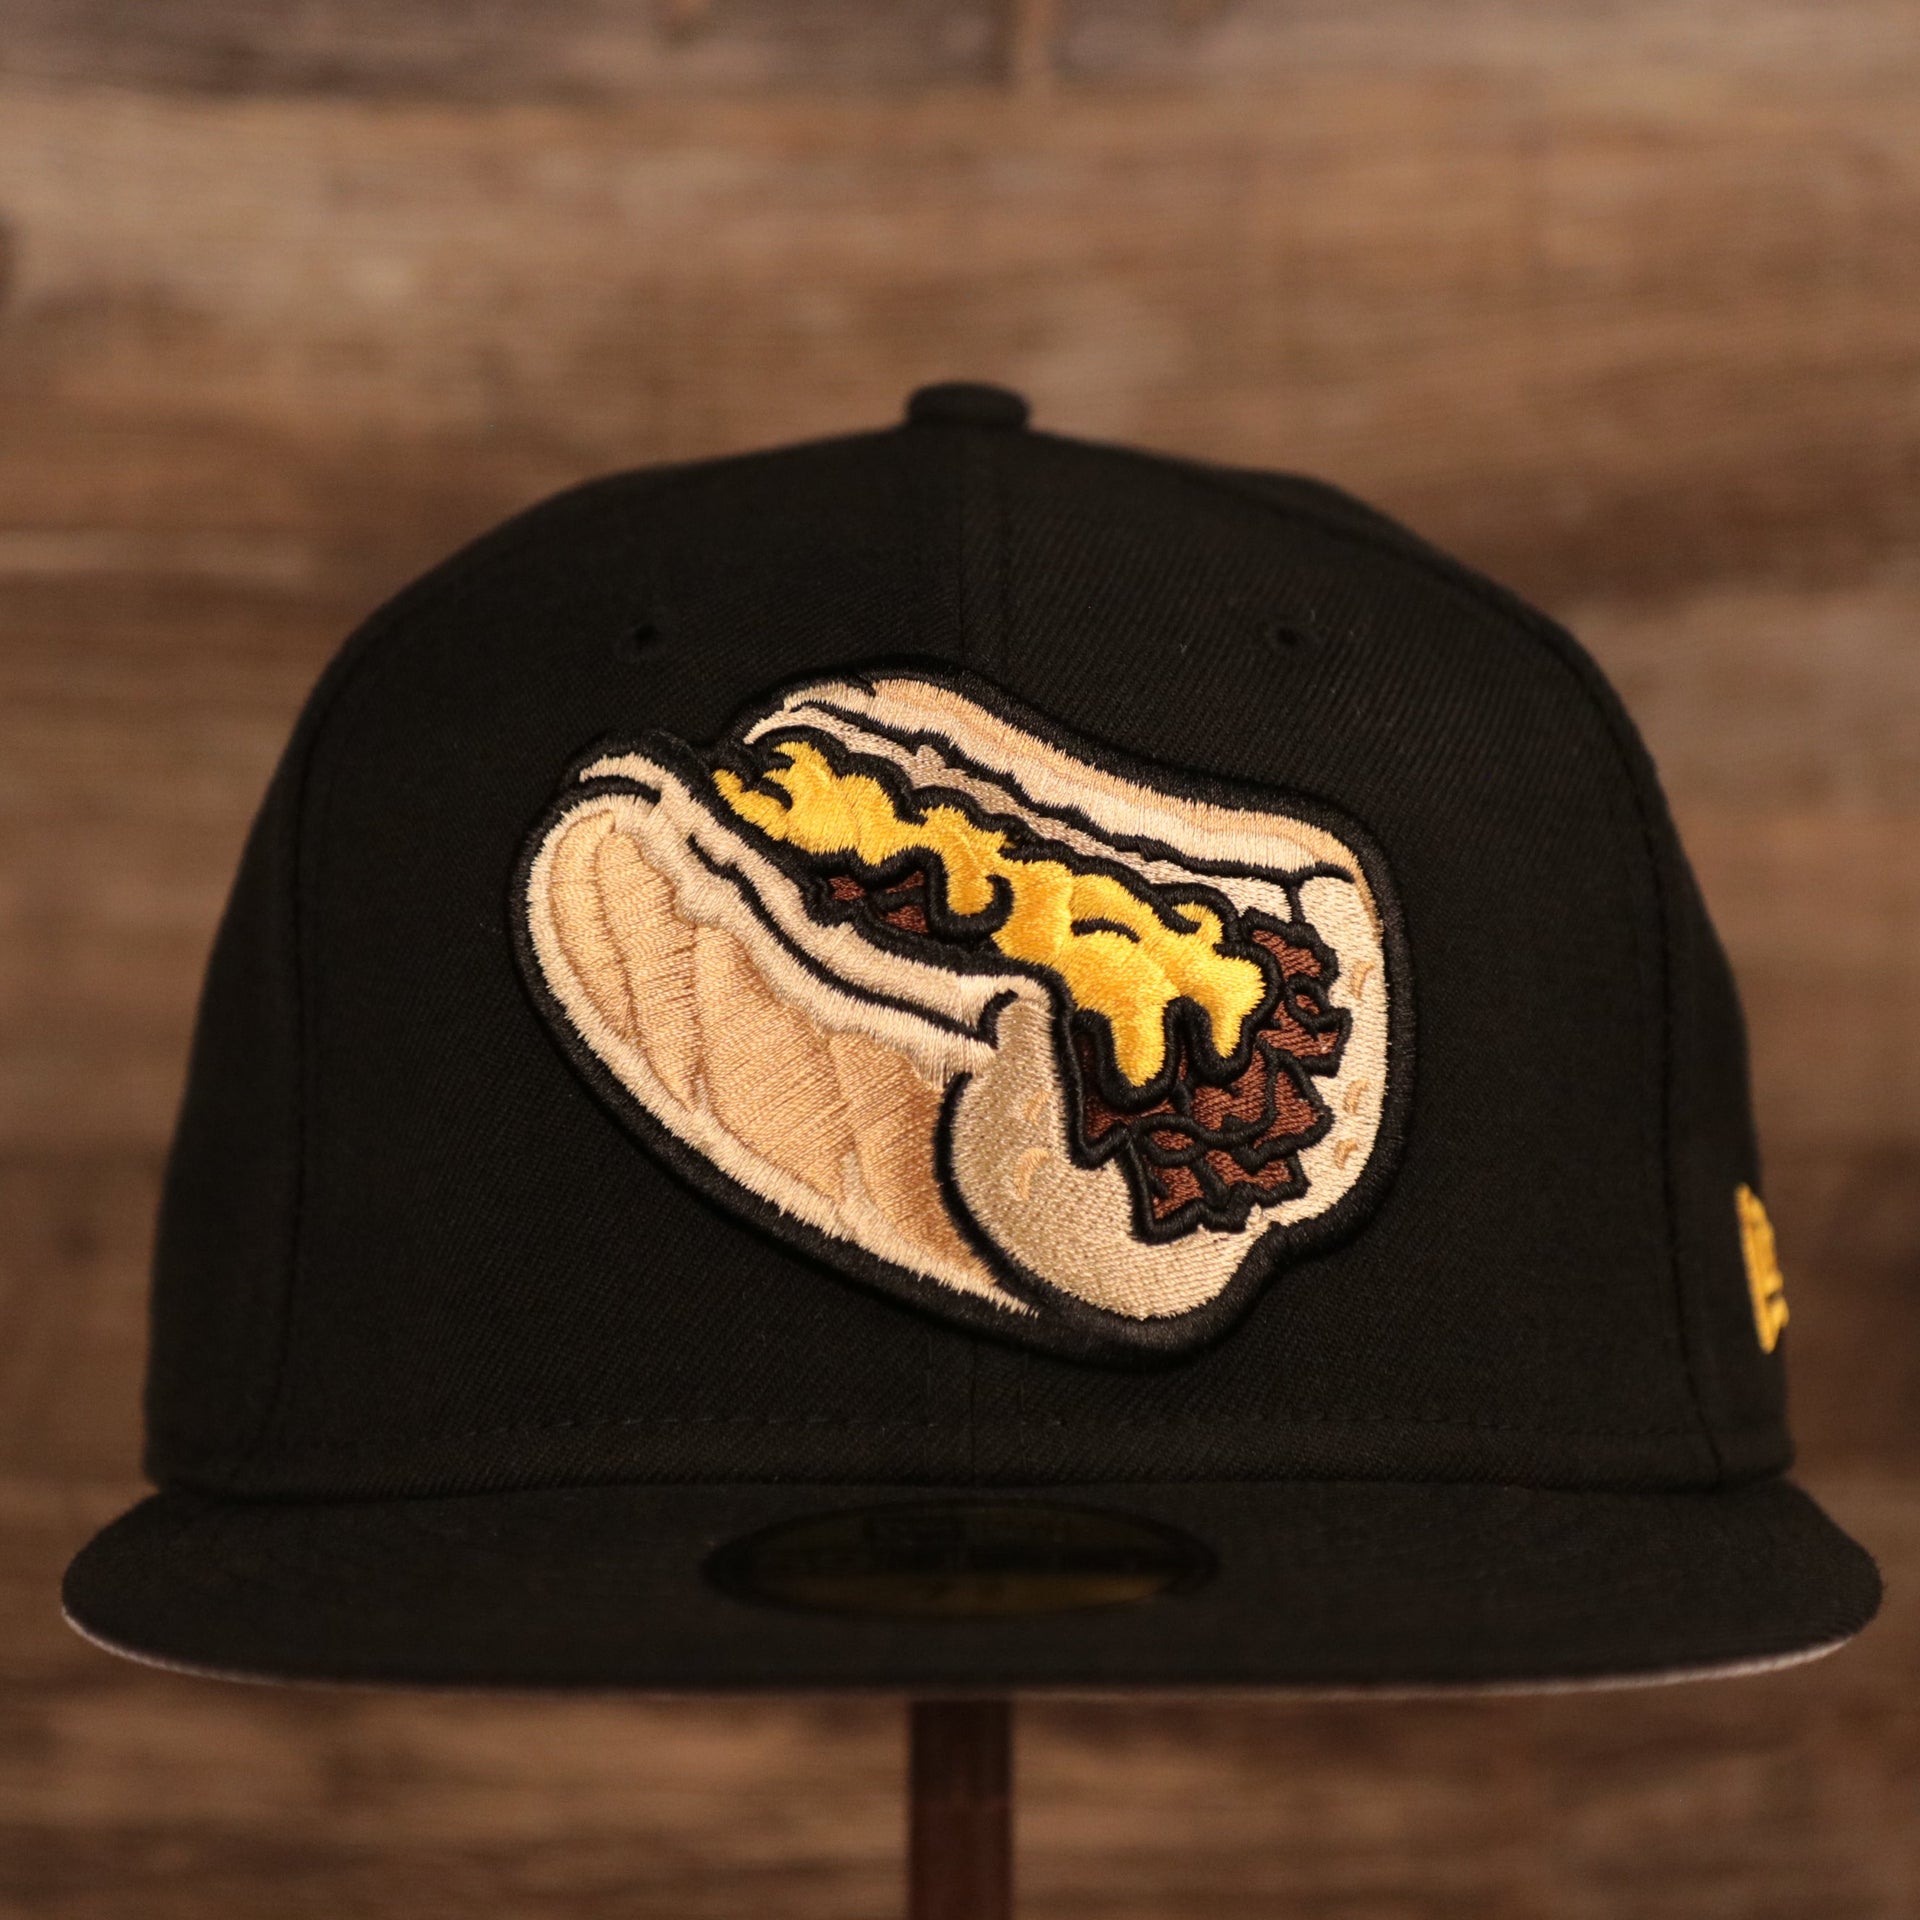 The front look of the Lehigh Valley Iron Pigs Philly cheesesteak without onions side patch fitted cap.